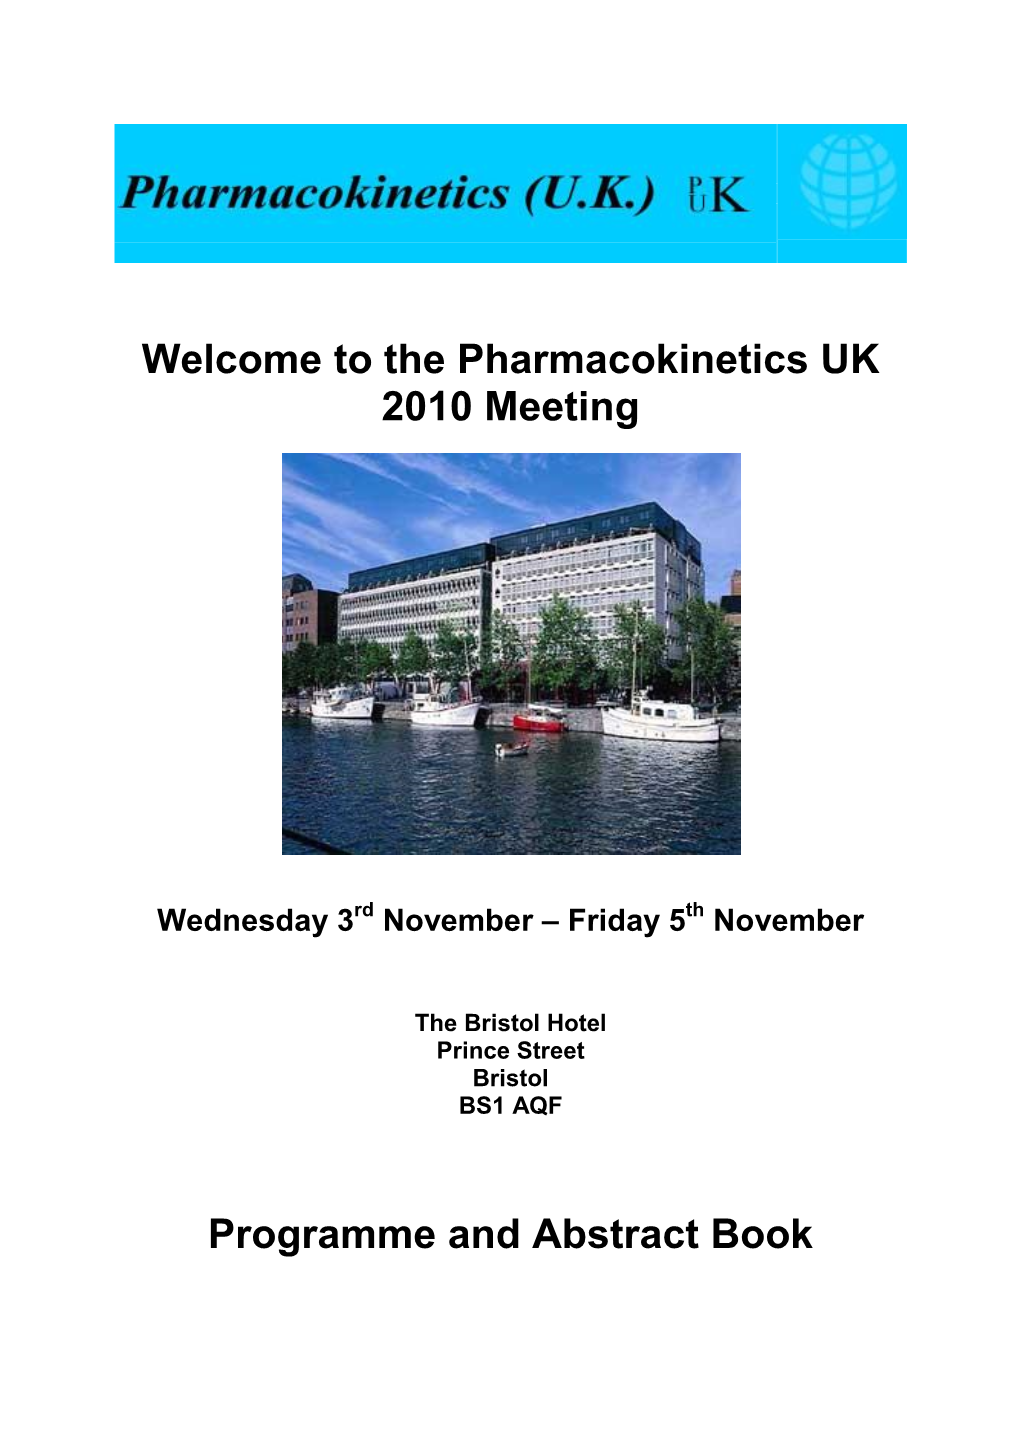 The Pharmacokinetics UK 2010 Meeting Programme and Abstract